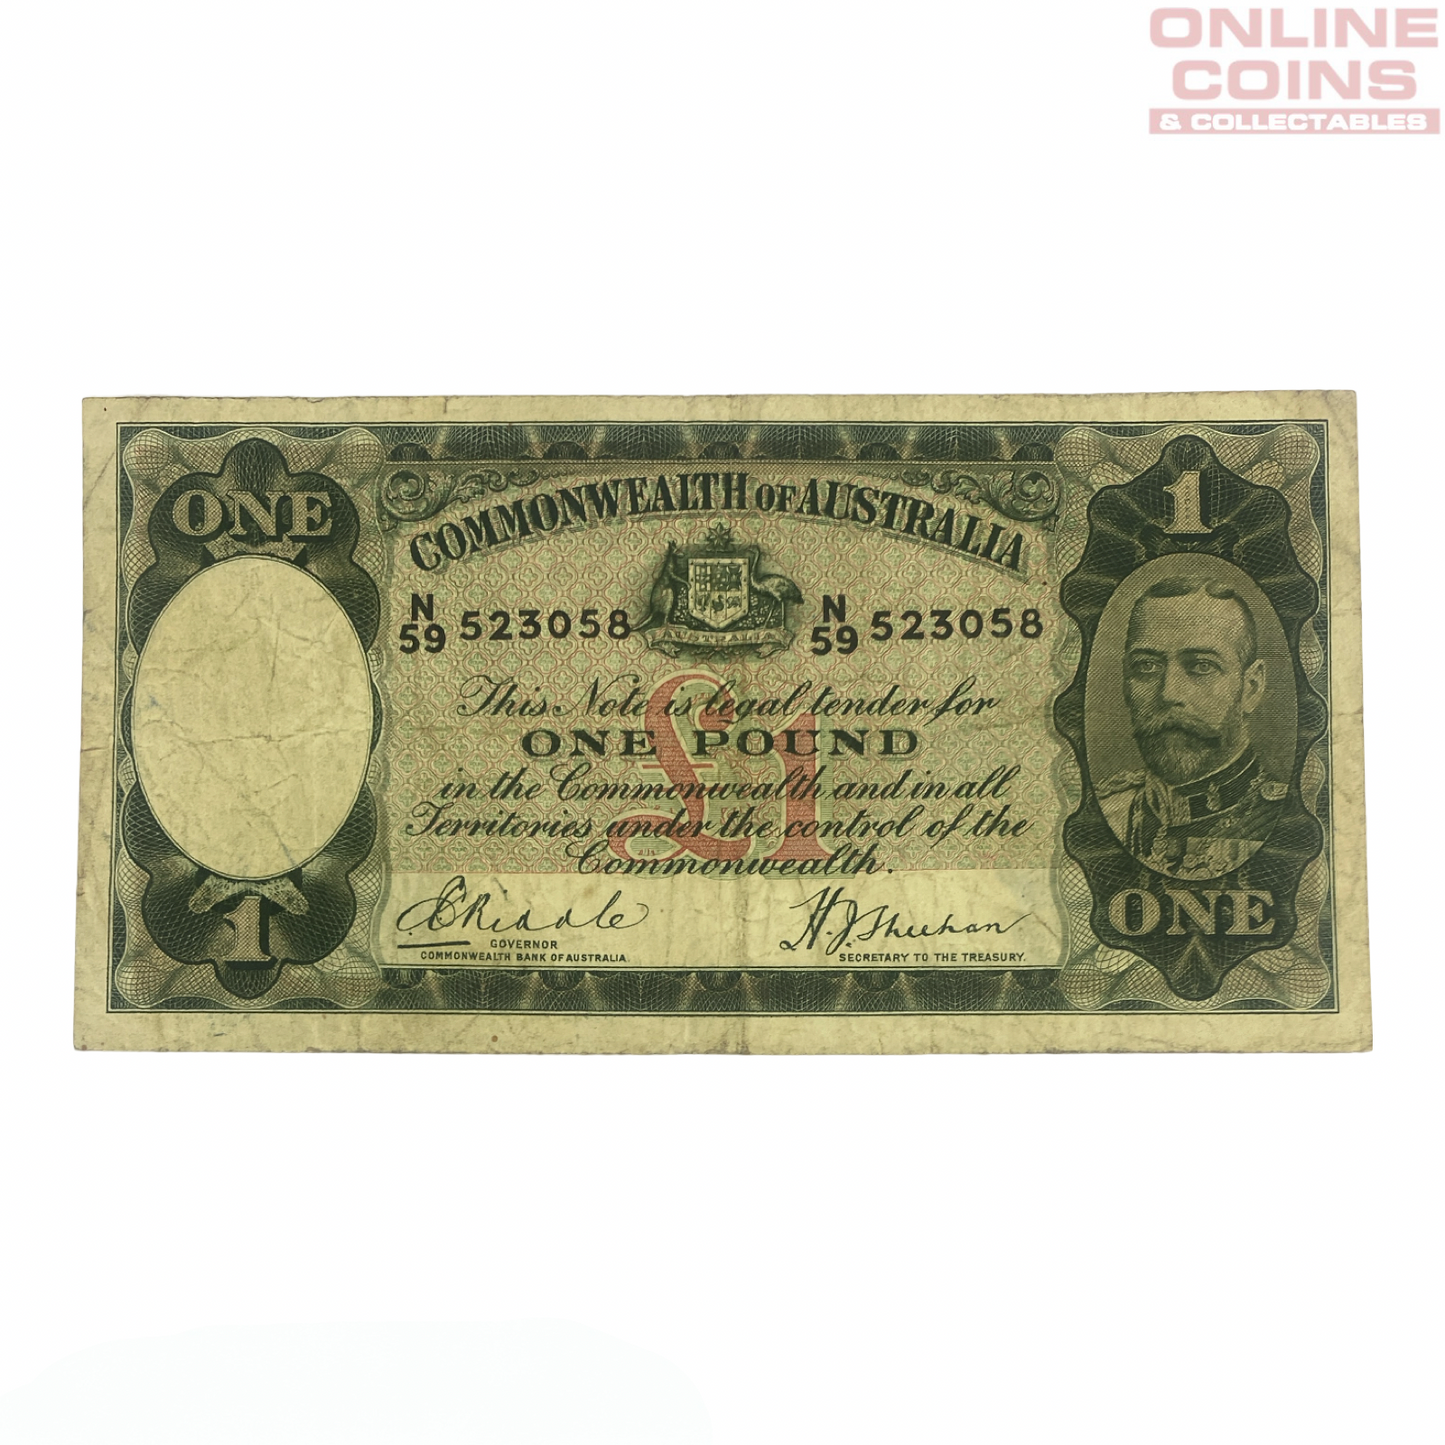 1933 Riddle Sheehan One Pound Note - FINE Grade